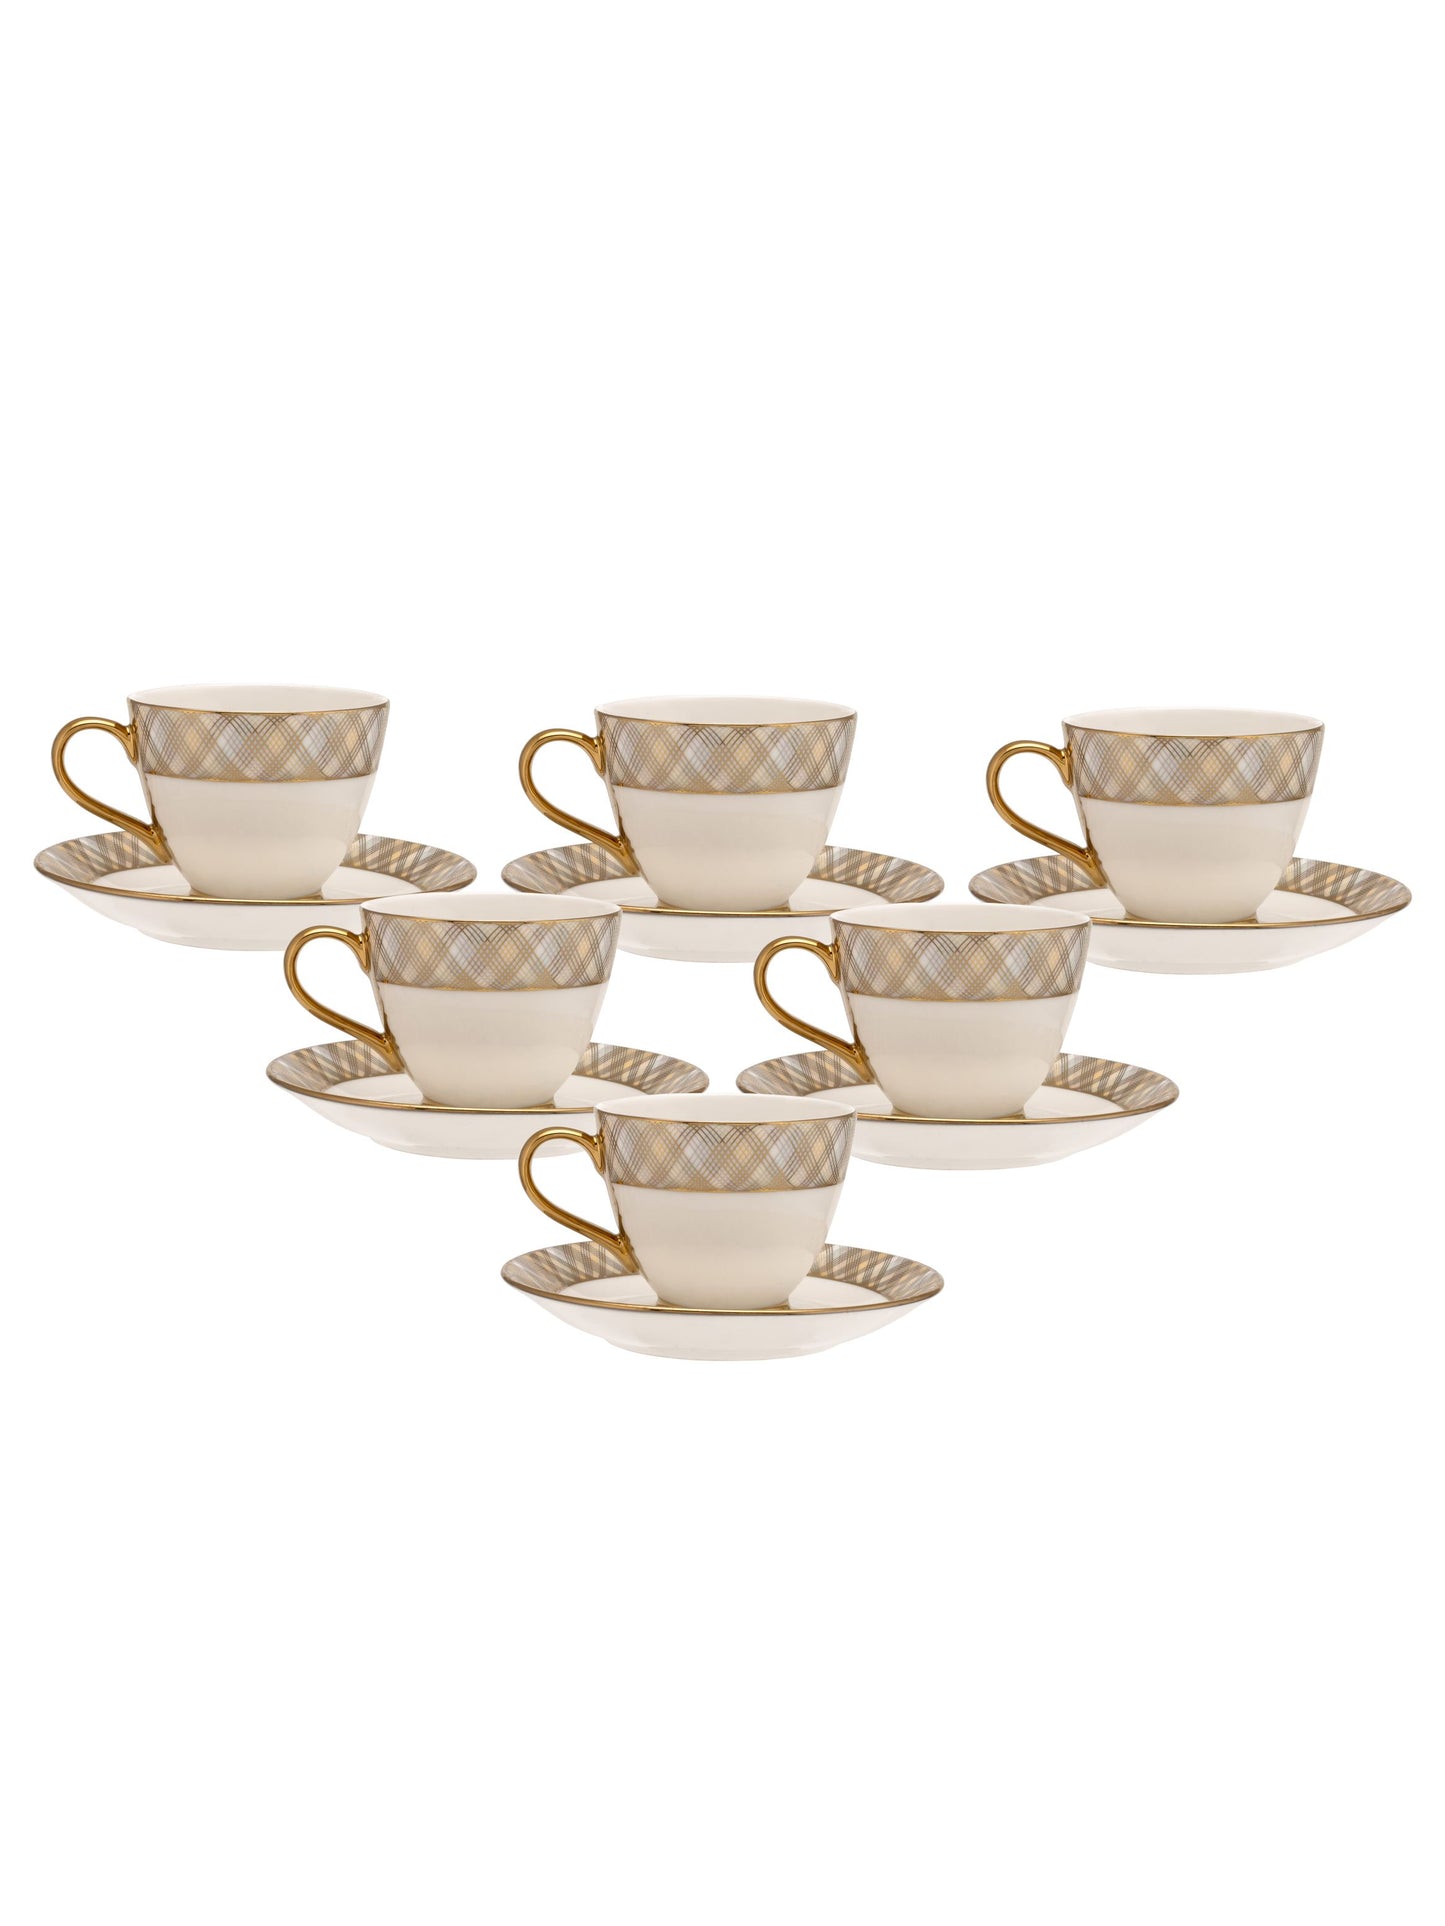 King Ebony Cup & Saucer, 160 ml, Set of 12 (6 Cups + 6 Saucers) (E601)